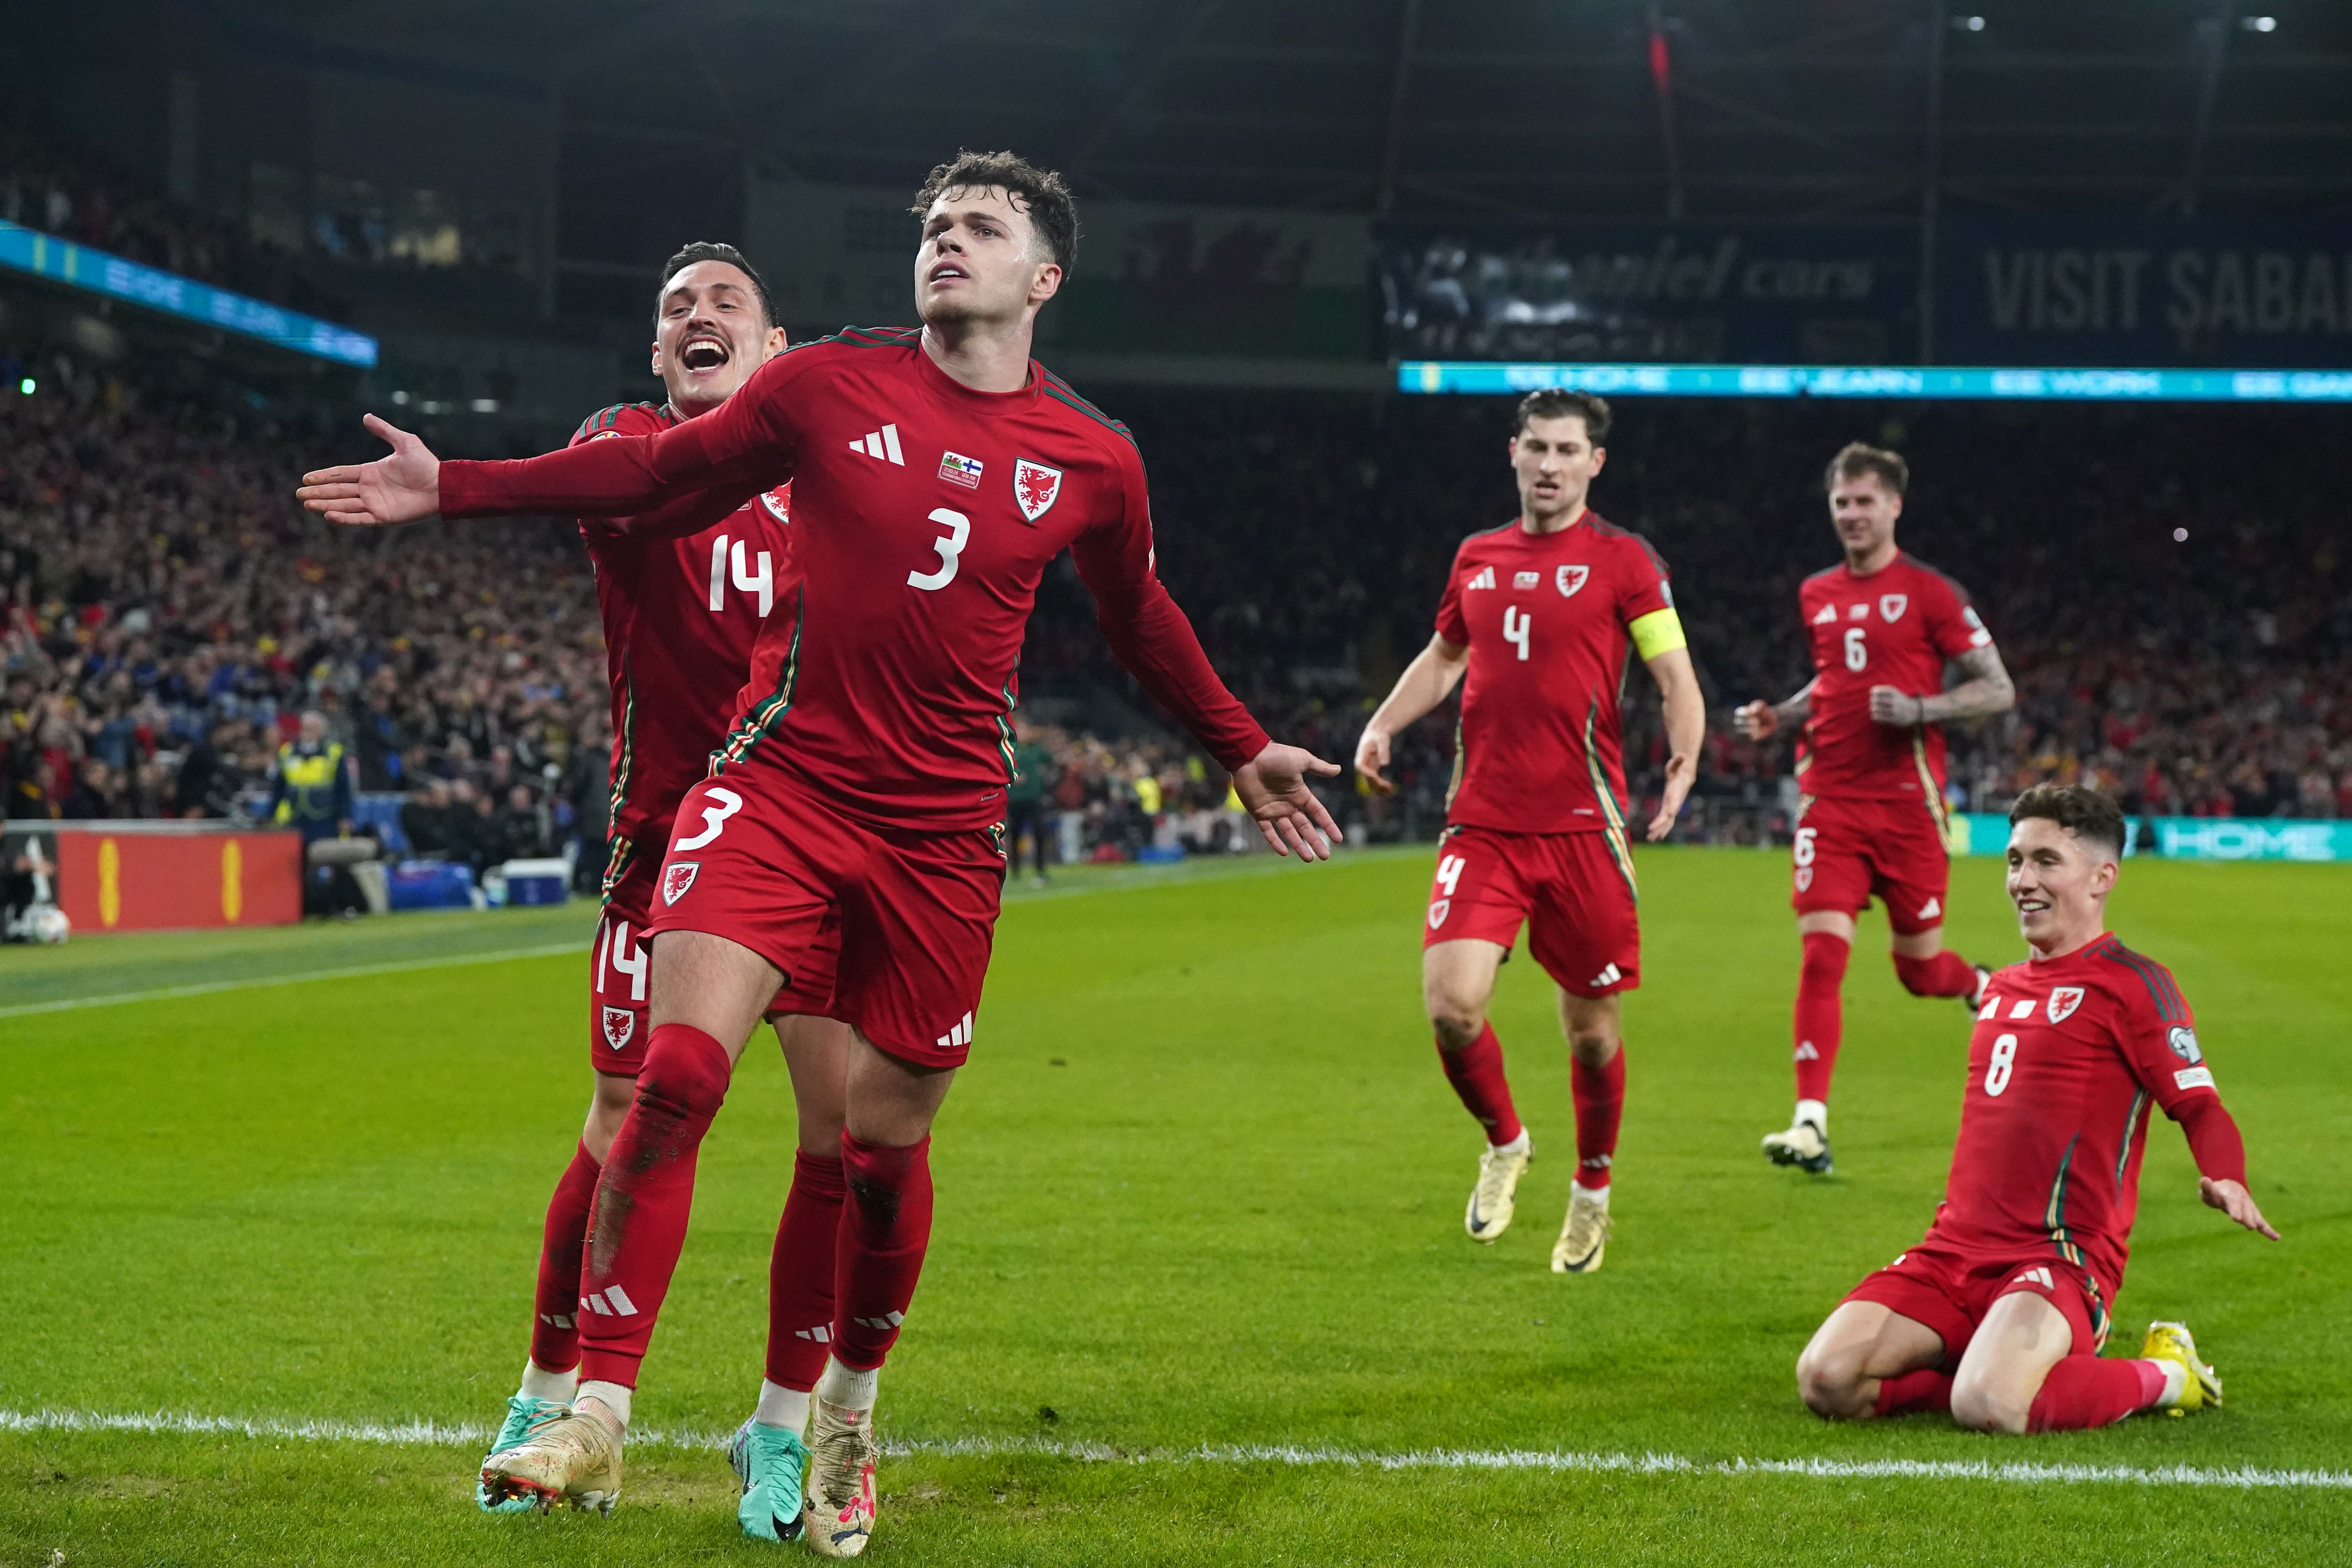 Neco Williams scored for Wales as they beat Finland 4-1 in the play-off semi-final